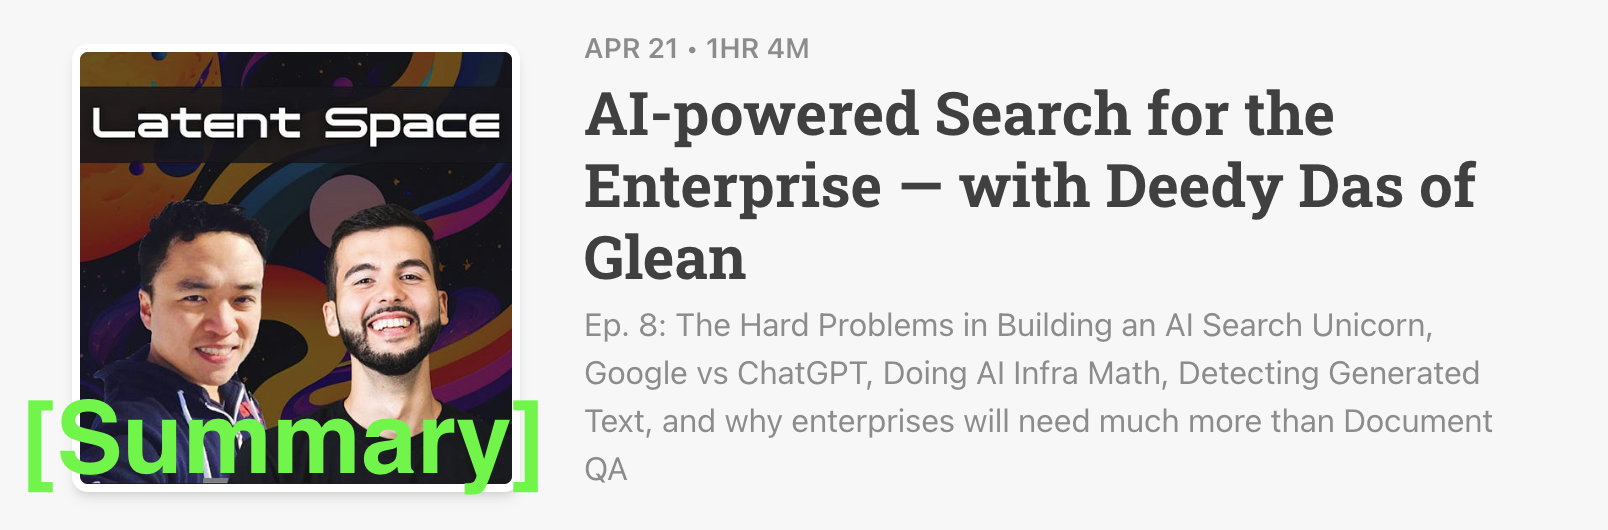 Latent Space Podcast 4/21/23 [Summary] - AI-powered Search for the Enterprise — with Deedy Das of Glean